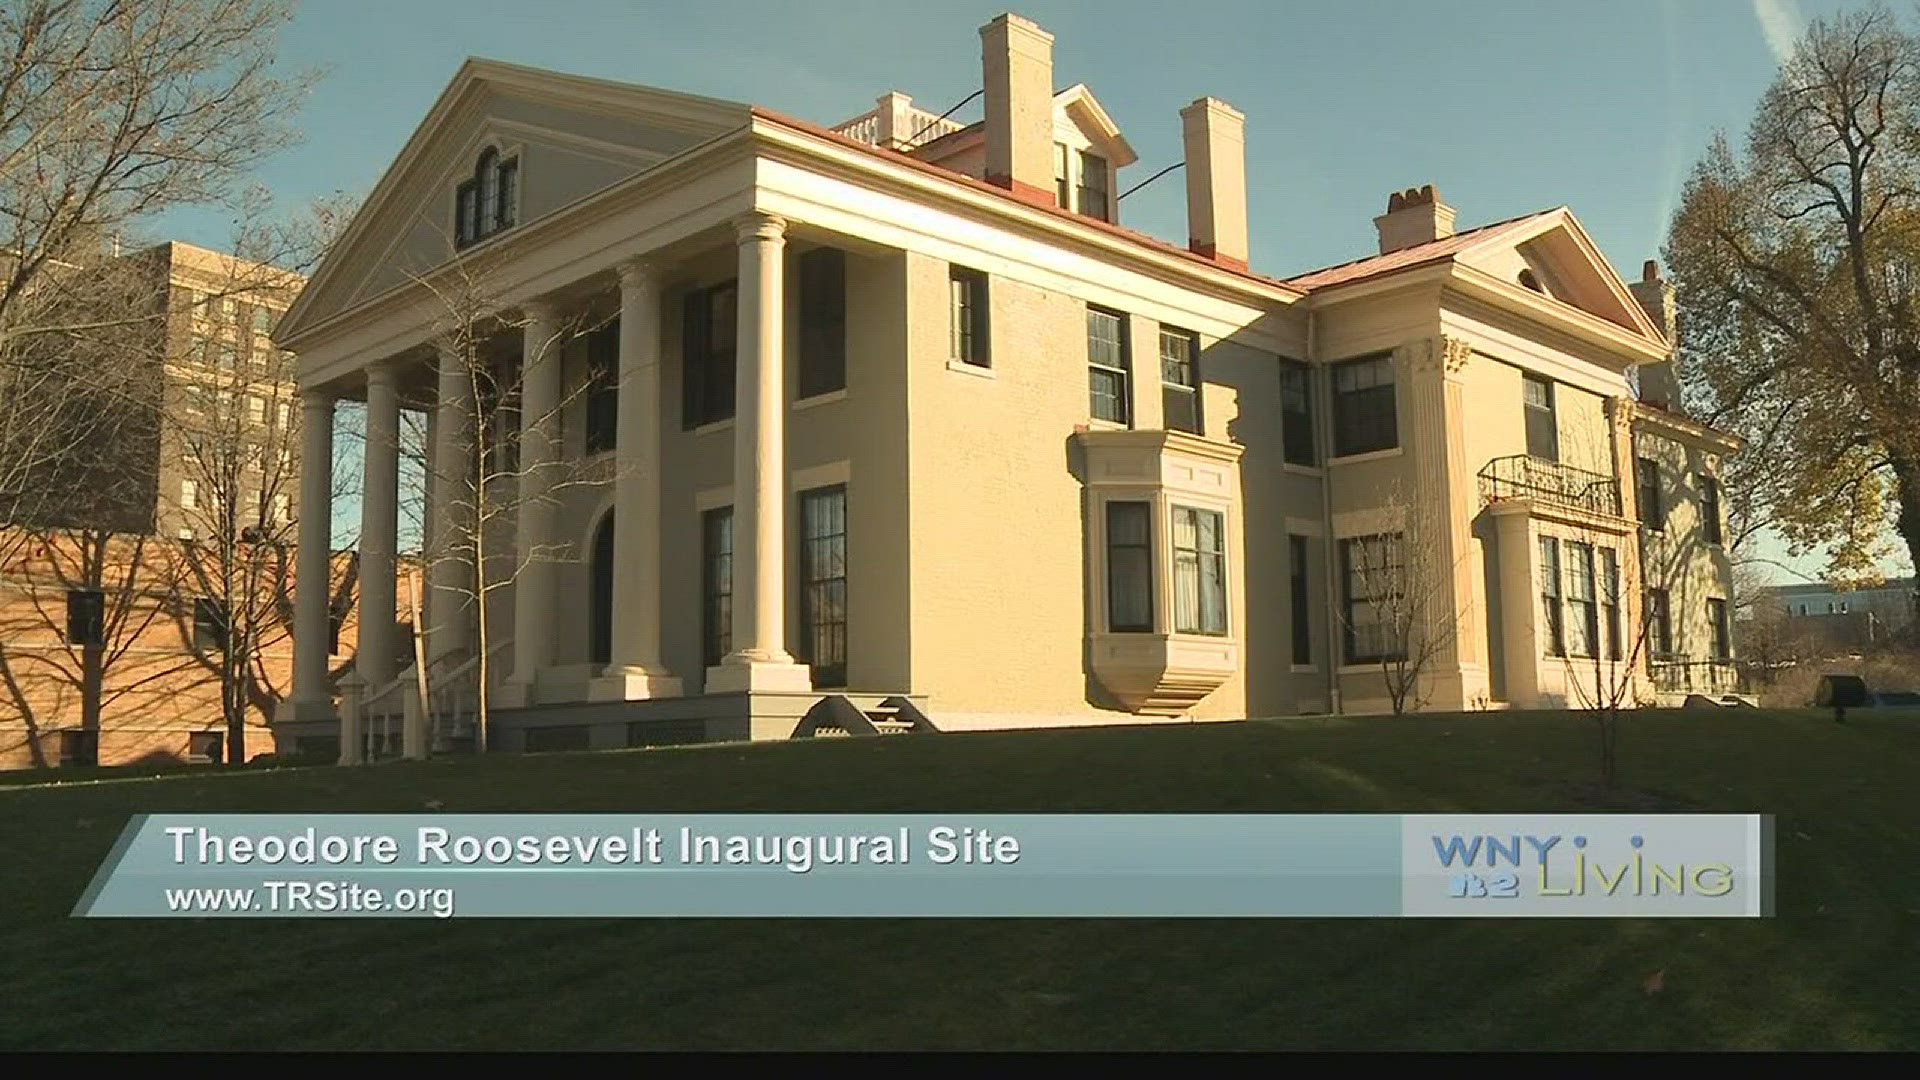 WNY Living - October 9 - Theodore Roosevelt Inaugural Site